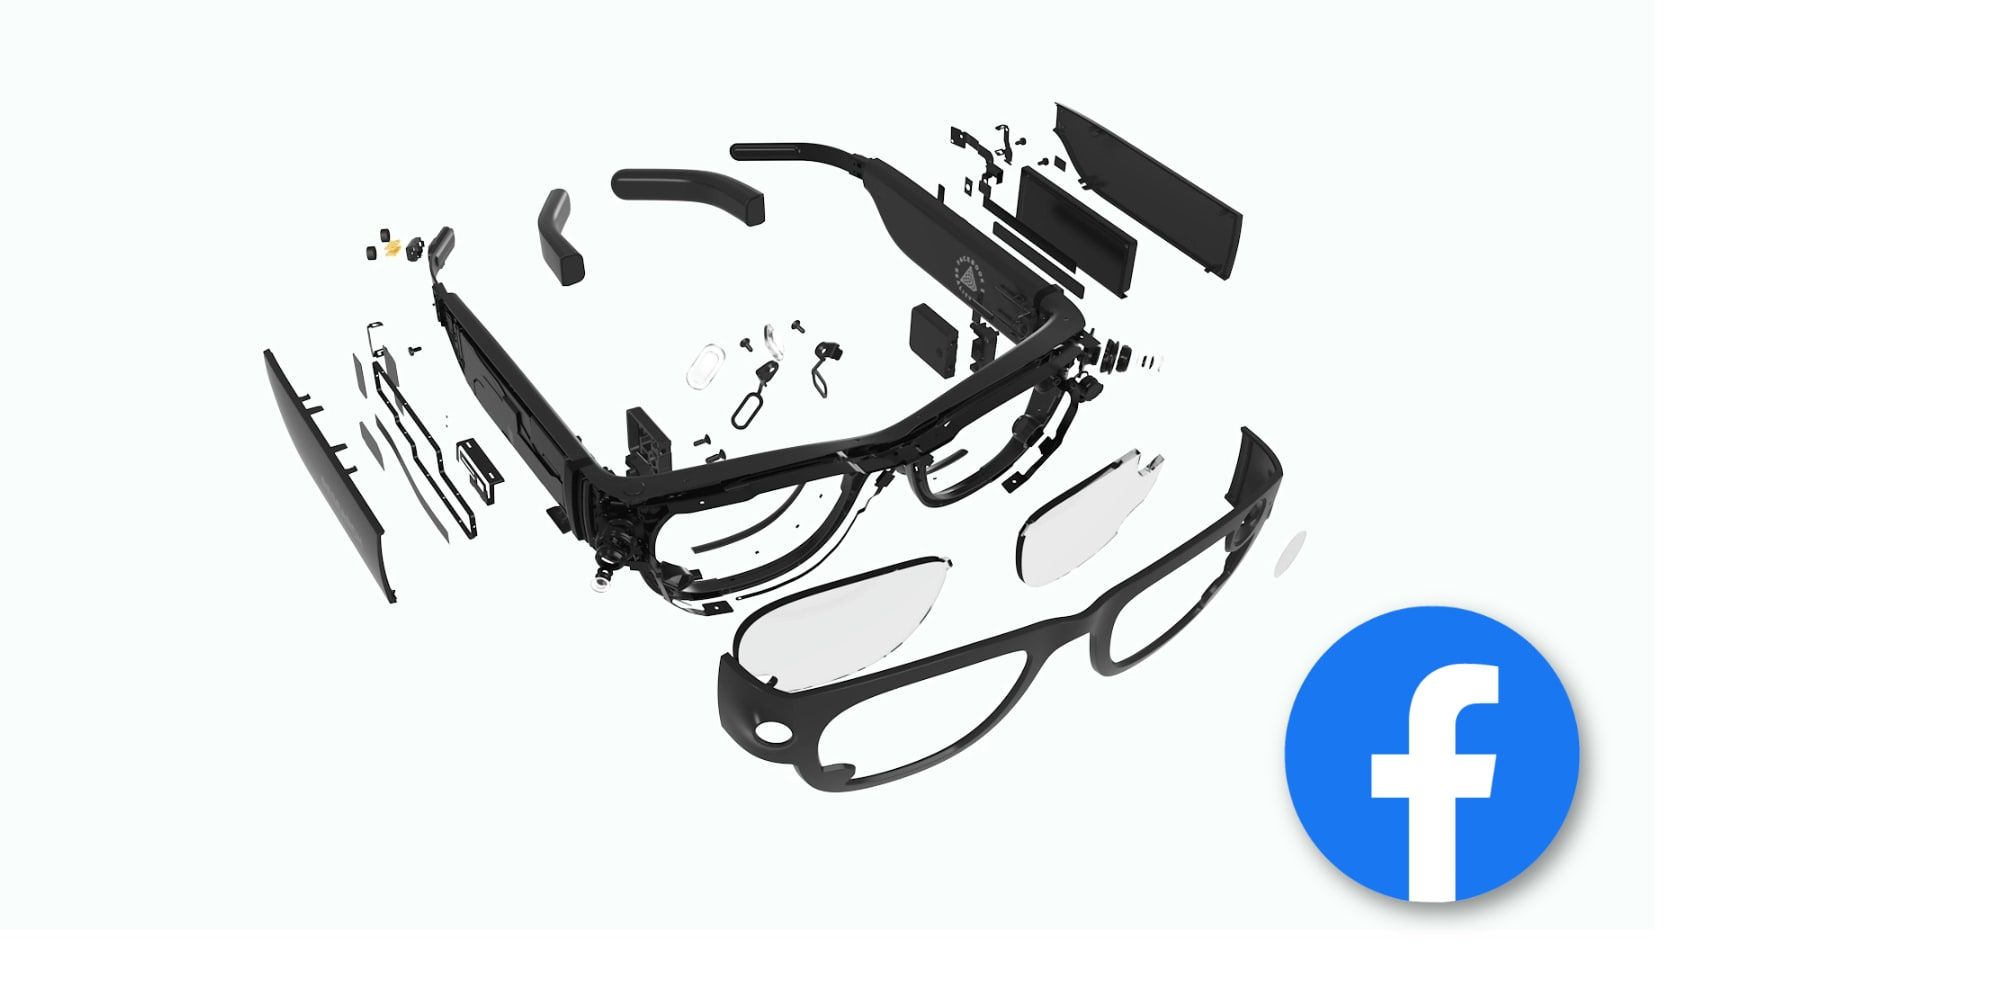 Facebook’s Mysterious AR Glasses Finally Leaked